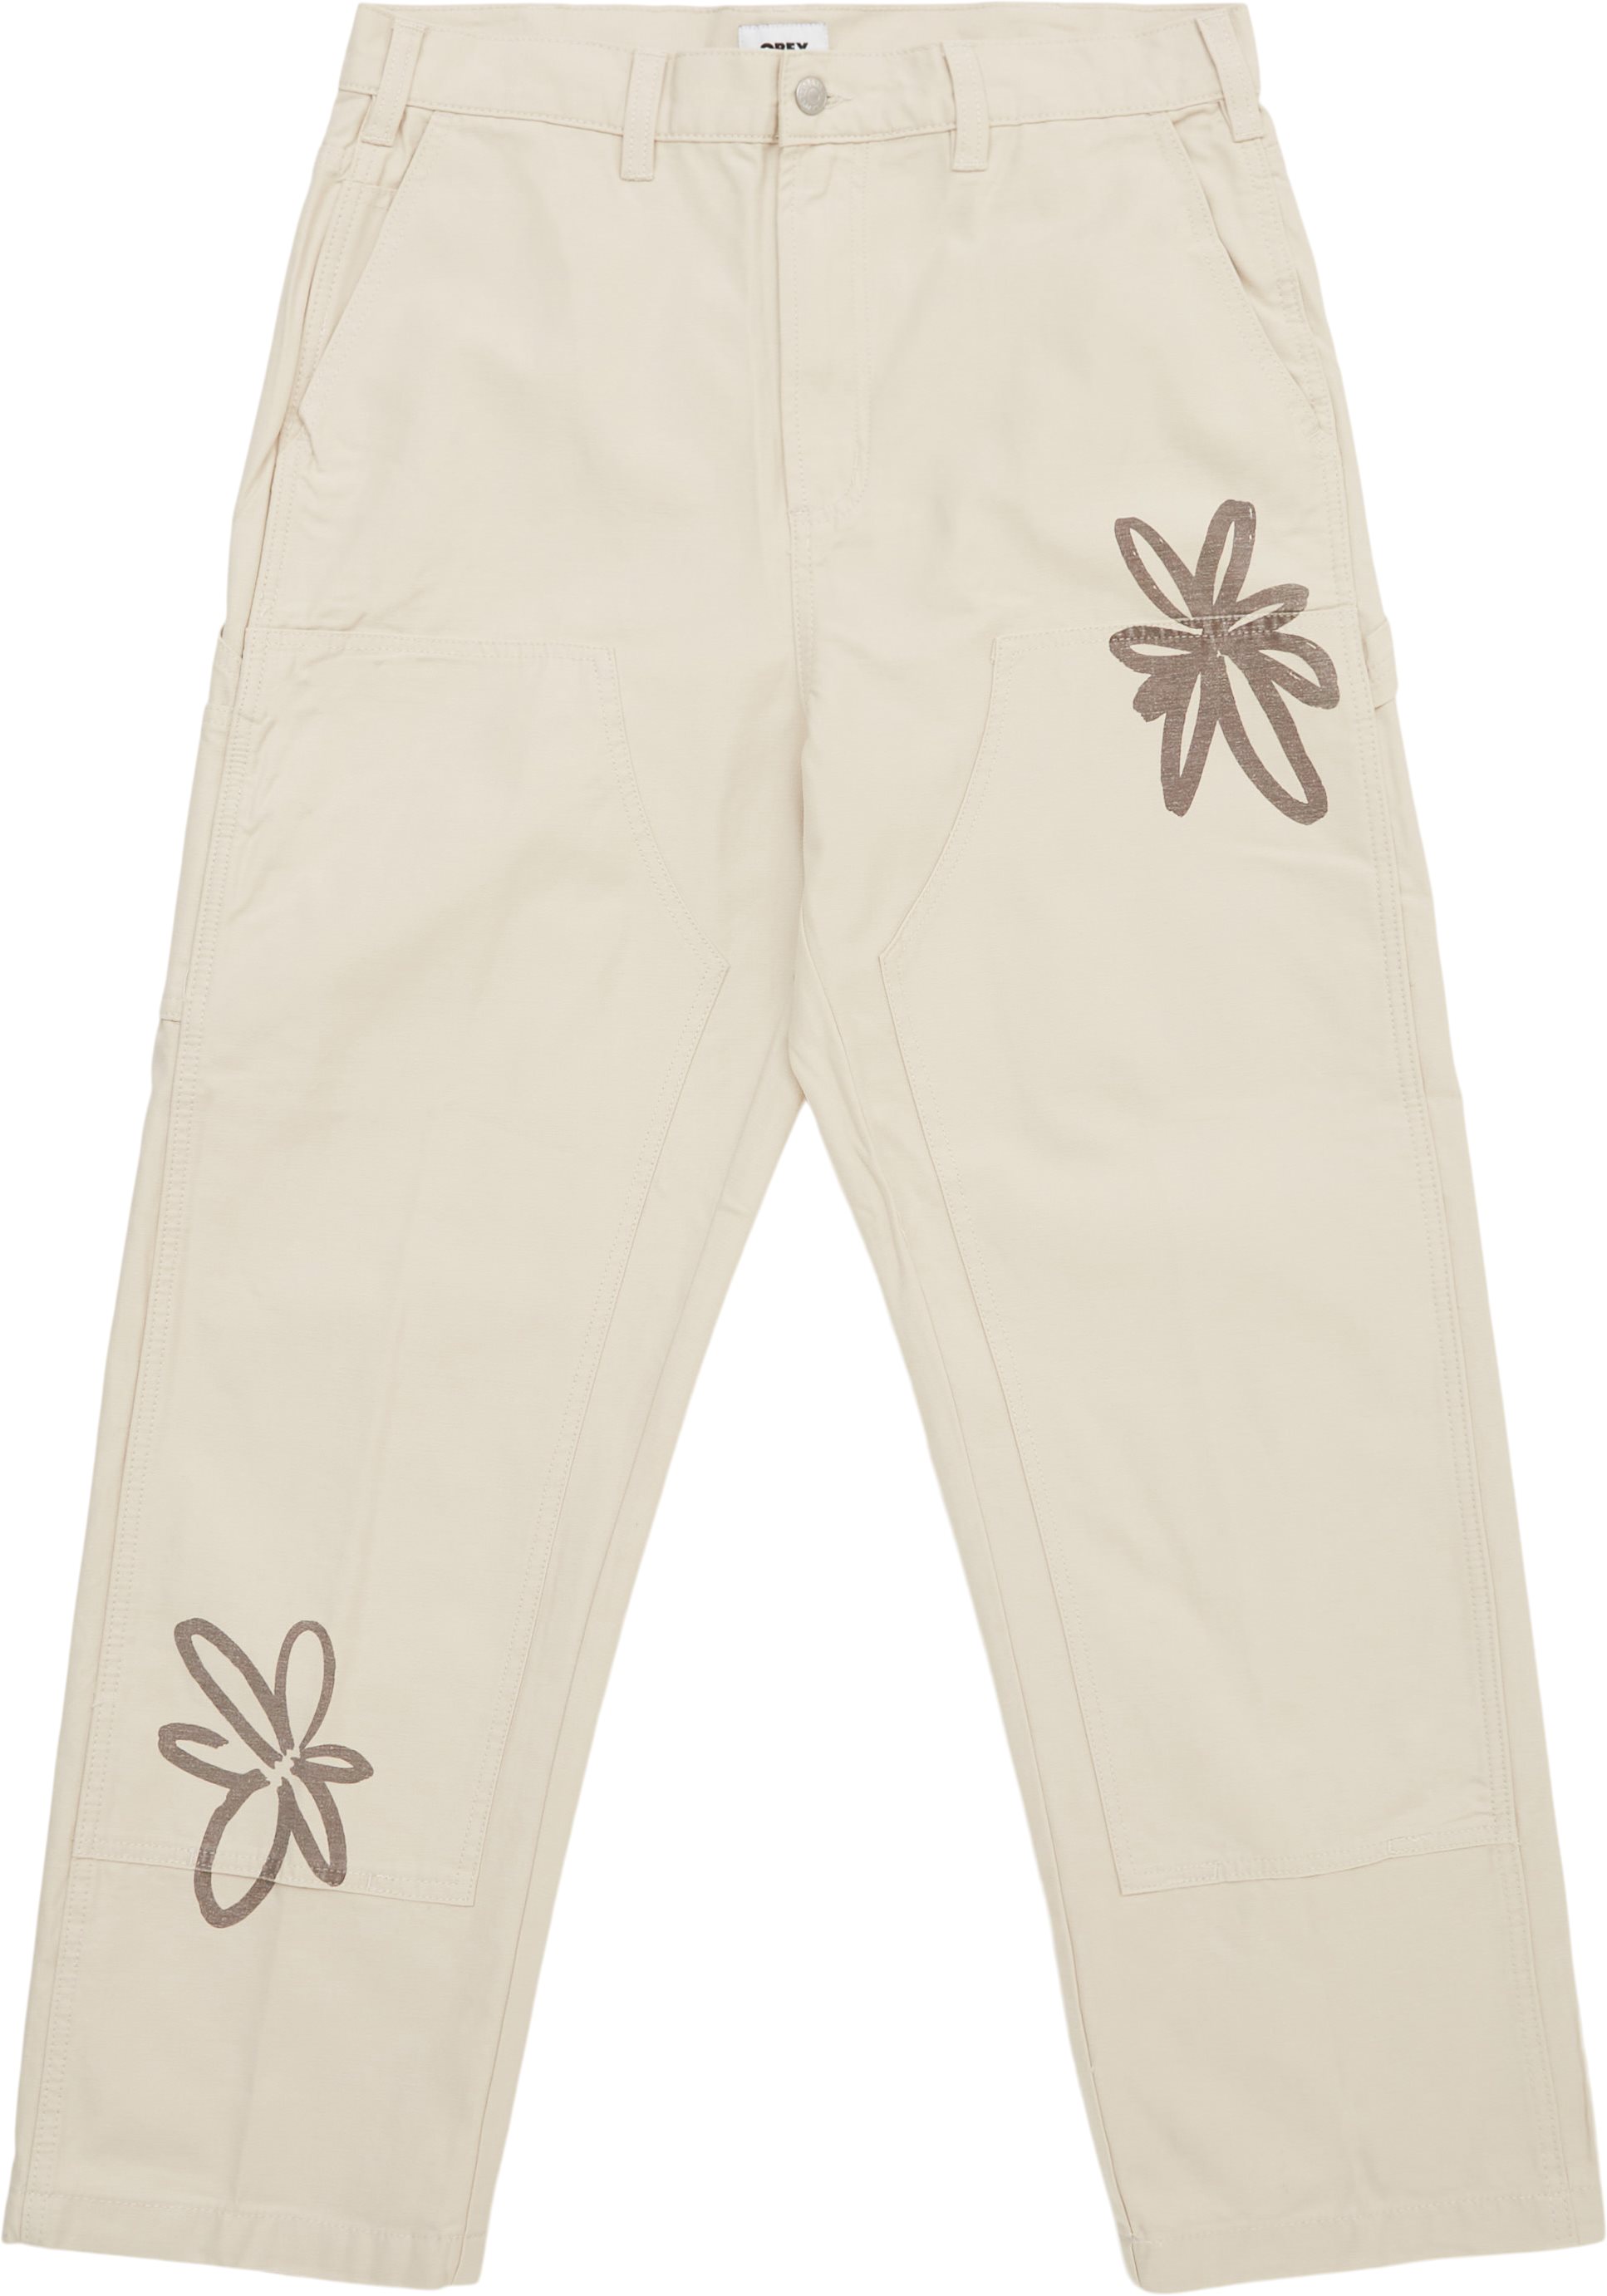 Obey Trousers BIG TIMER TWILL PRINTED CARPENTER PANT 142020219 Sand